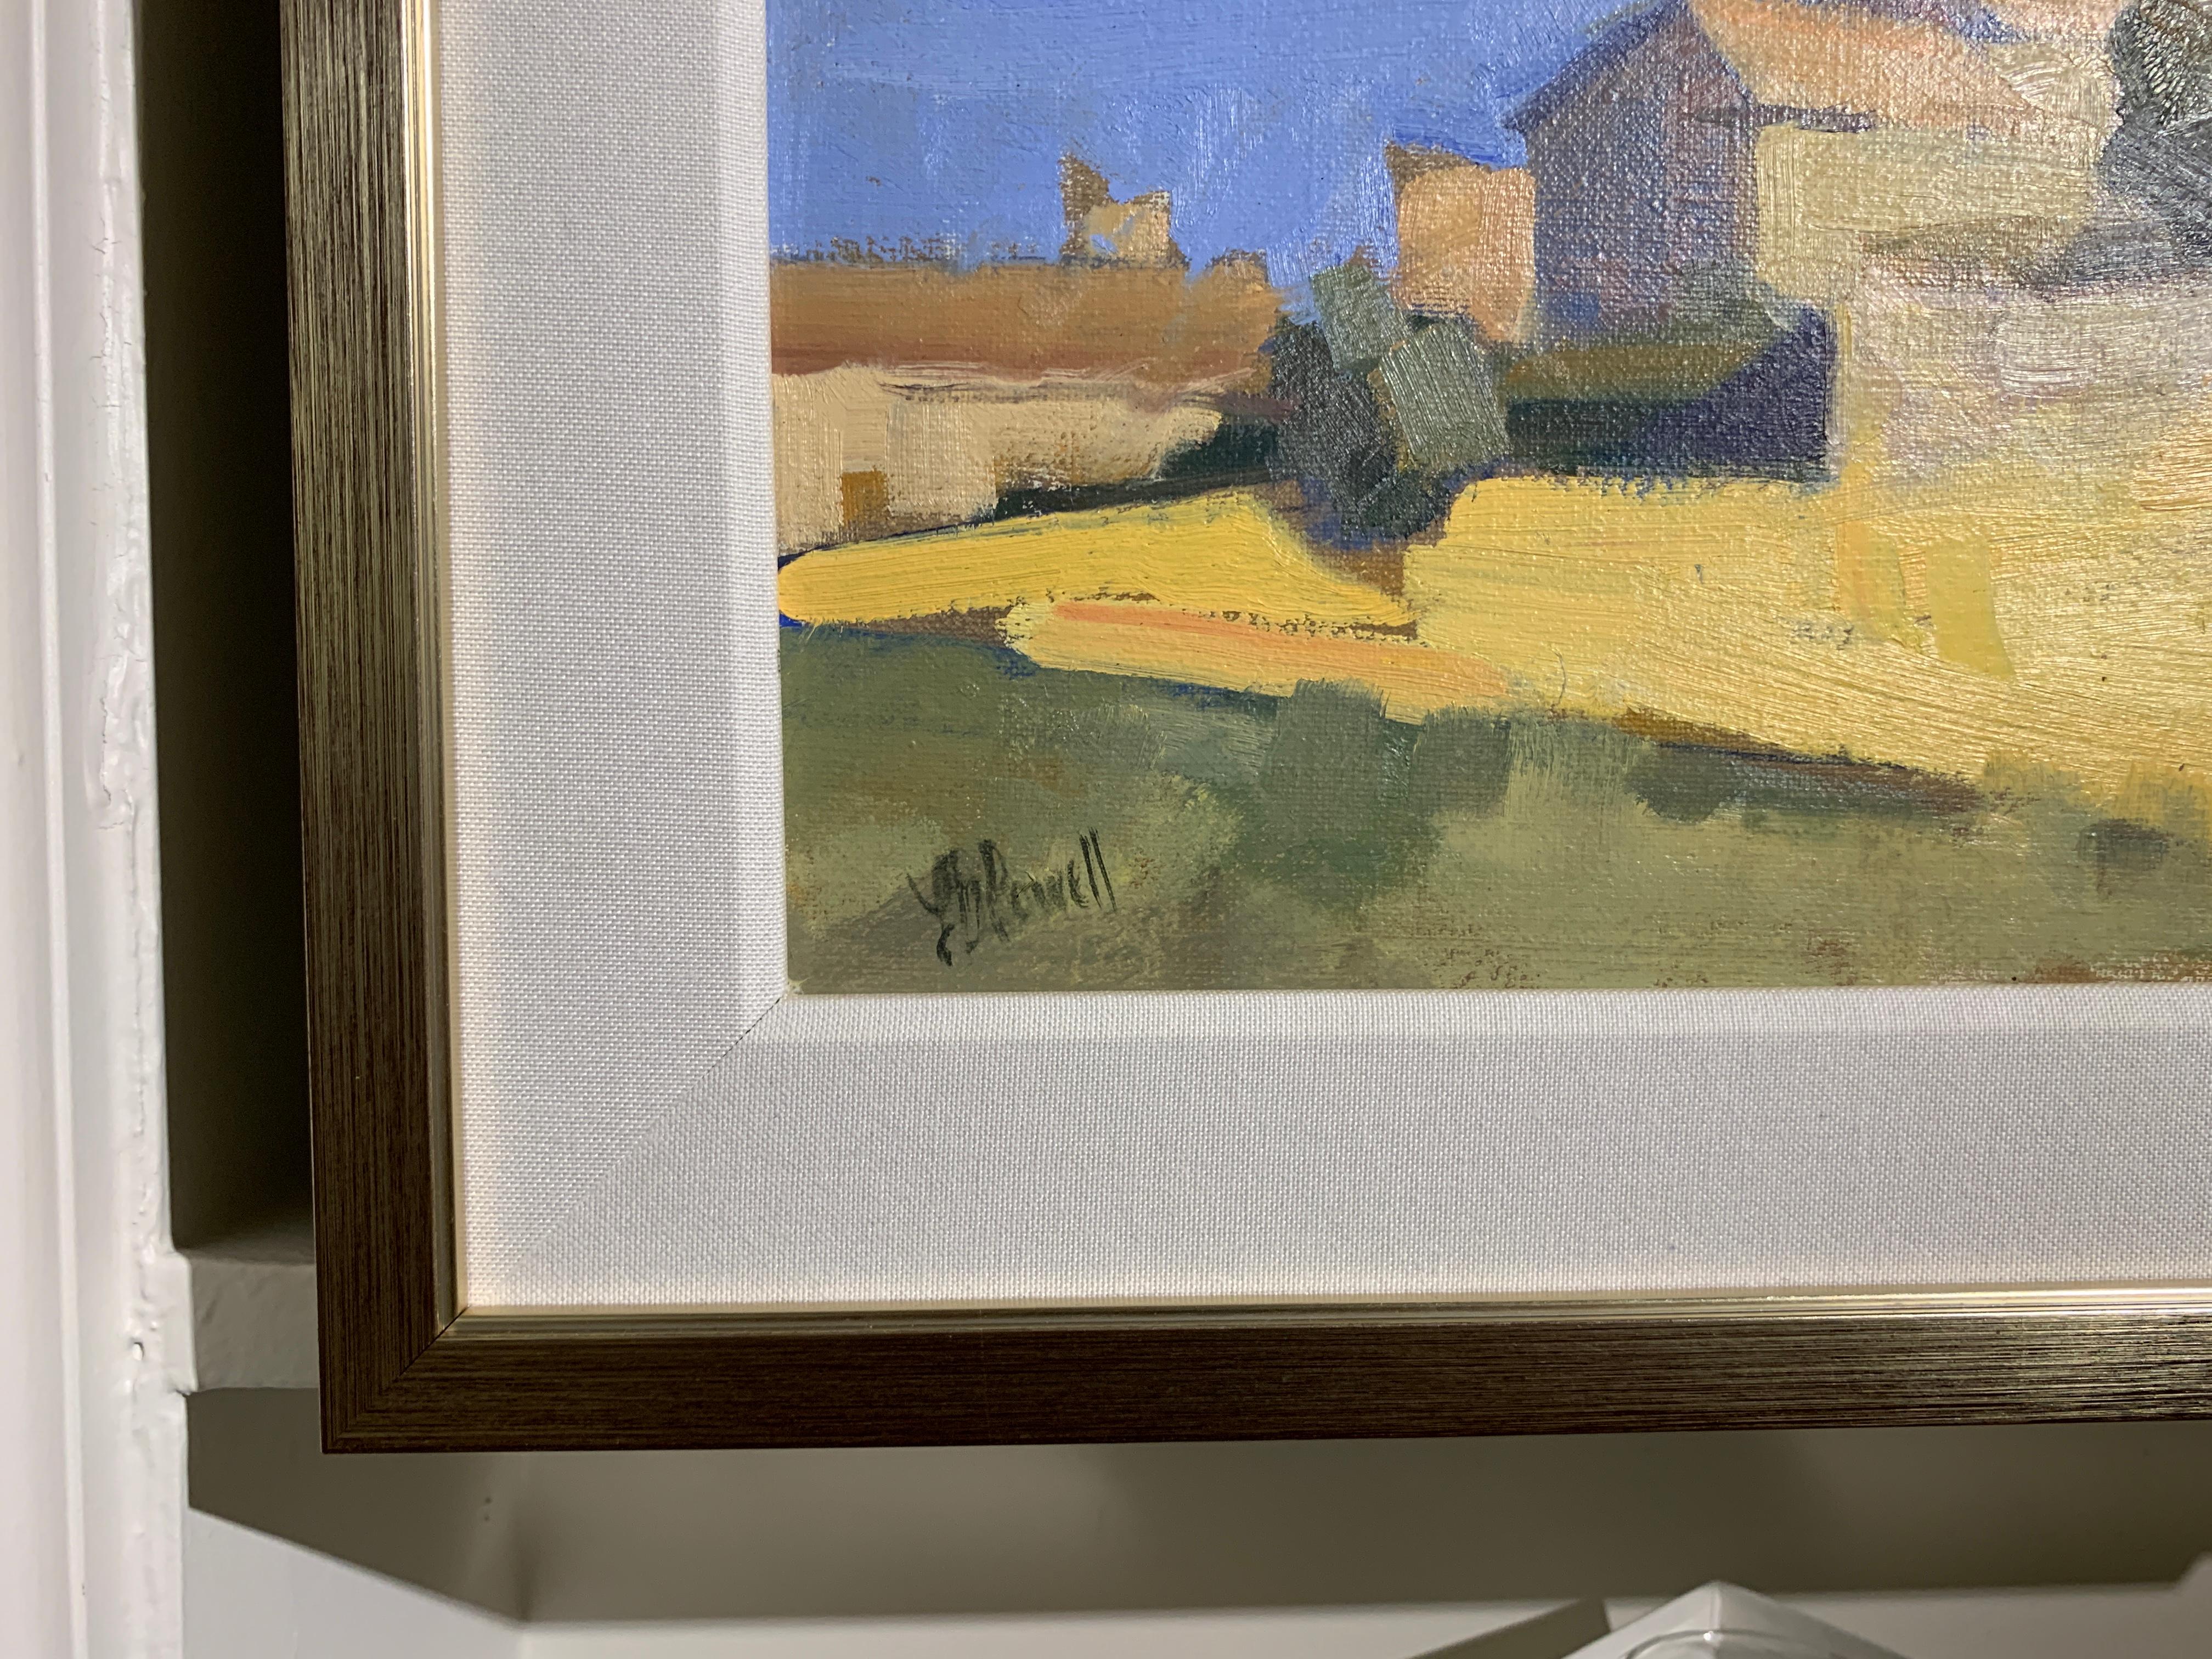 'Morning at Murs' us a small horizontal oil on linen Post-Impressionist painting created by American artist Lesley Powell in 2019. Featuring a palette made of blue, beige, yellow and green tones, the painting depicts with large strokes, the charming